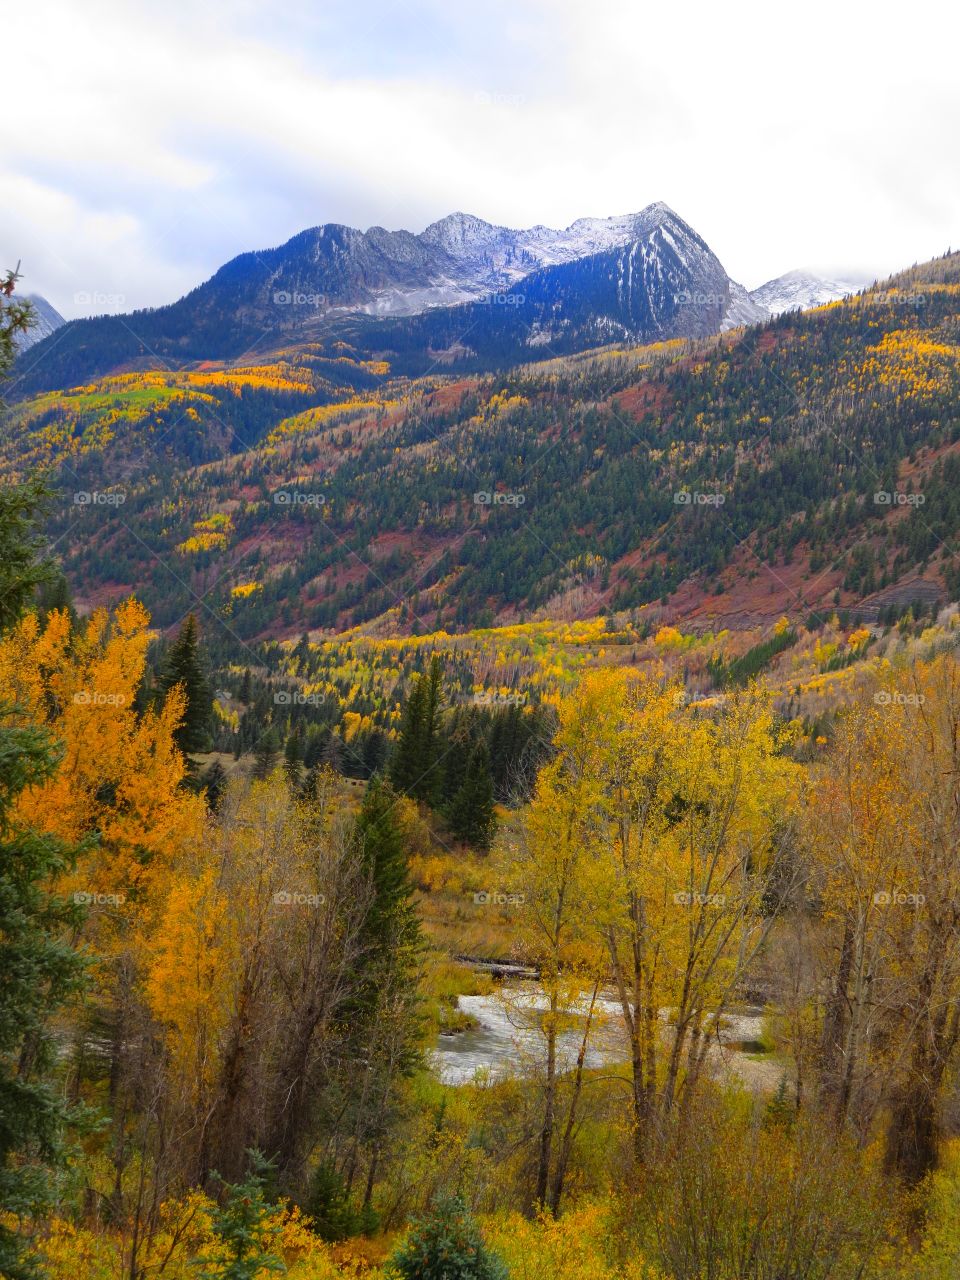  View from the trail in Colorado in the Autumn.